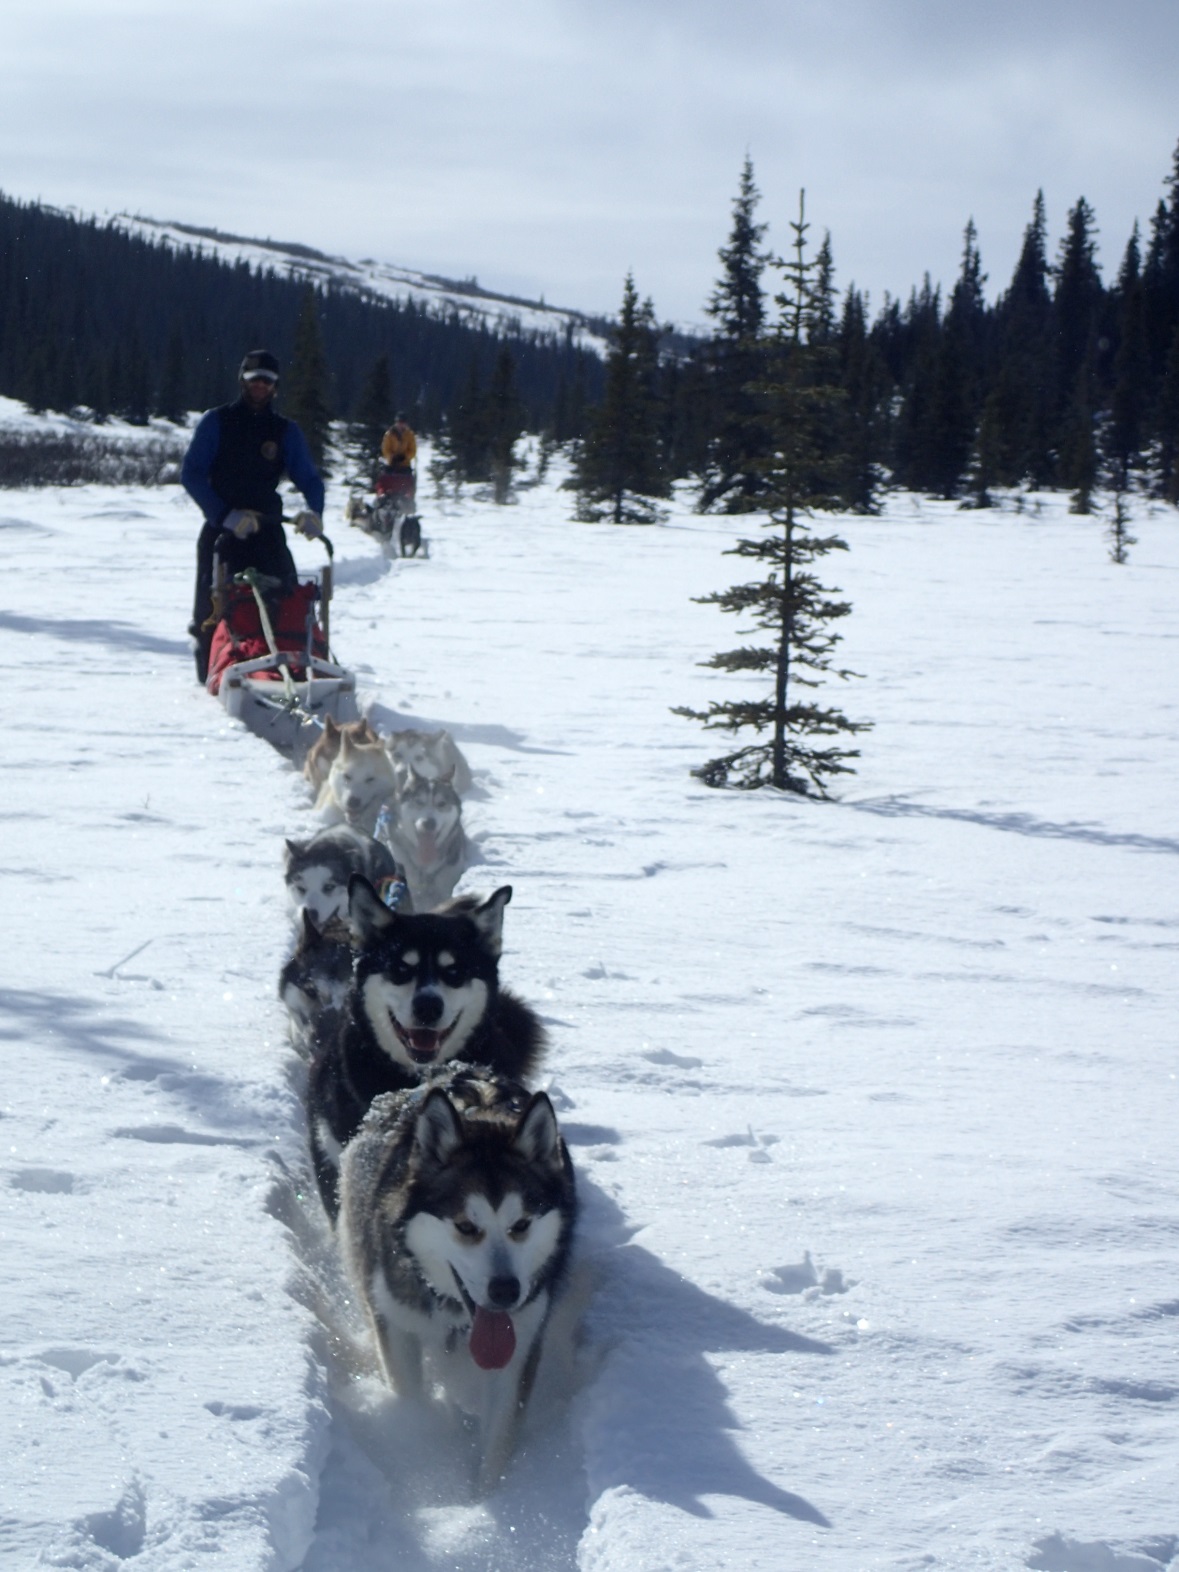 team of sled dogs pulling a sled through snow